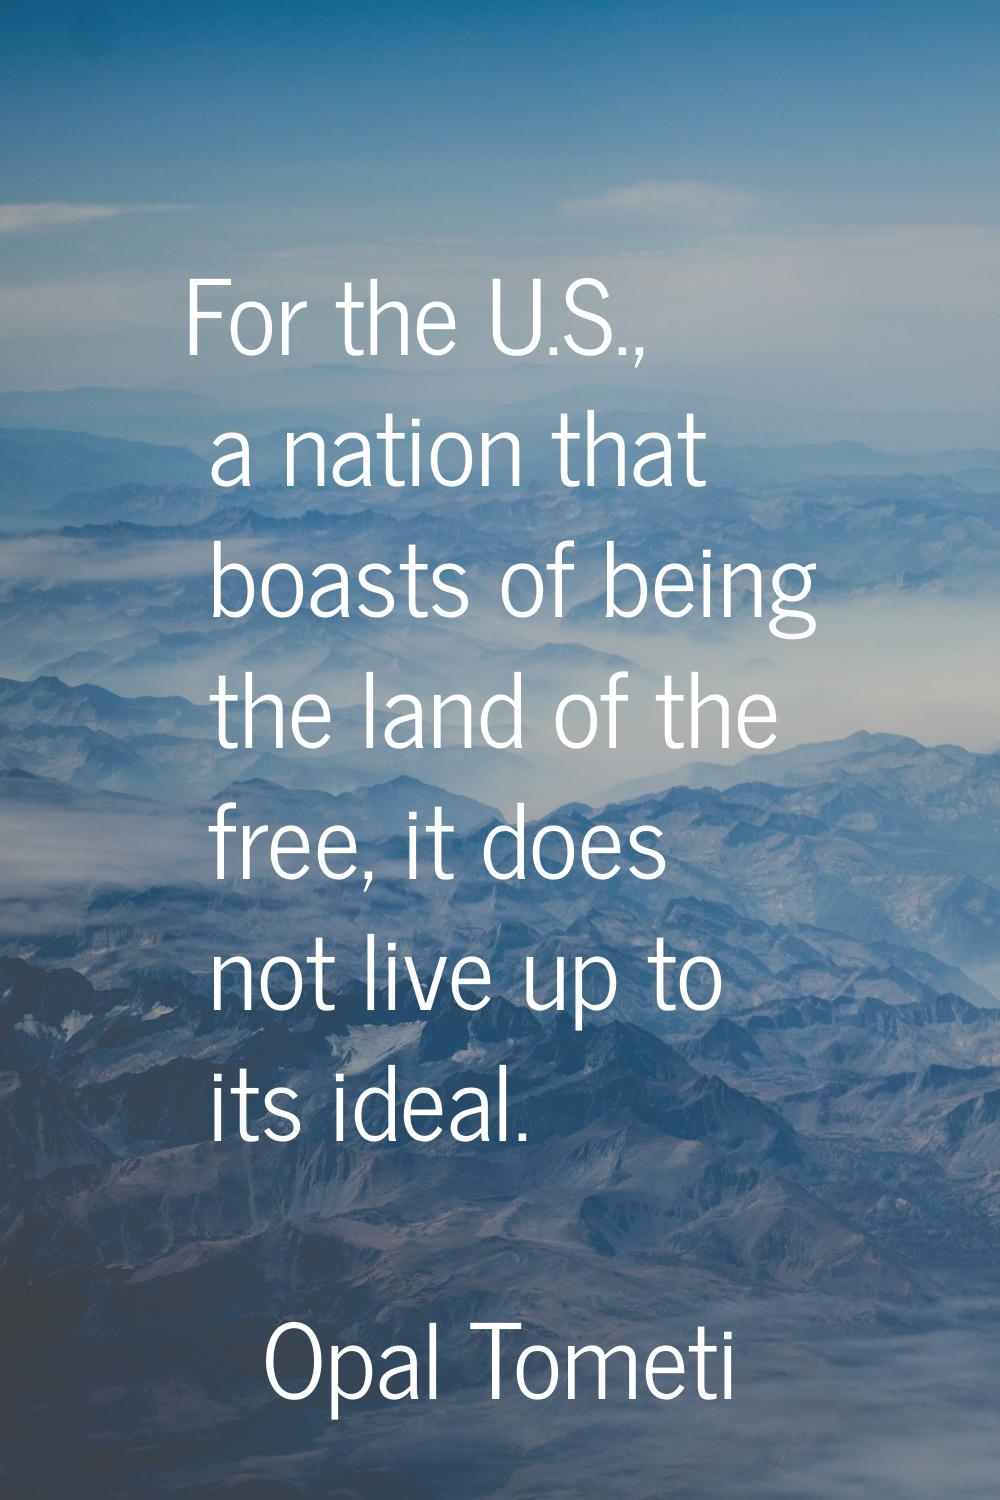 For the U.S., a nation that boasts of being the land of the free, it does not live up to its ideal.